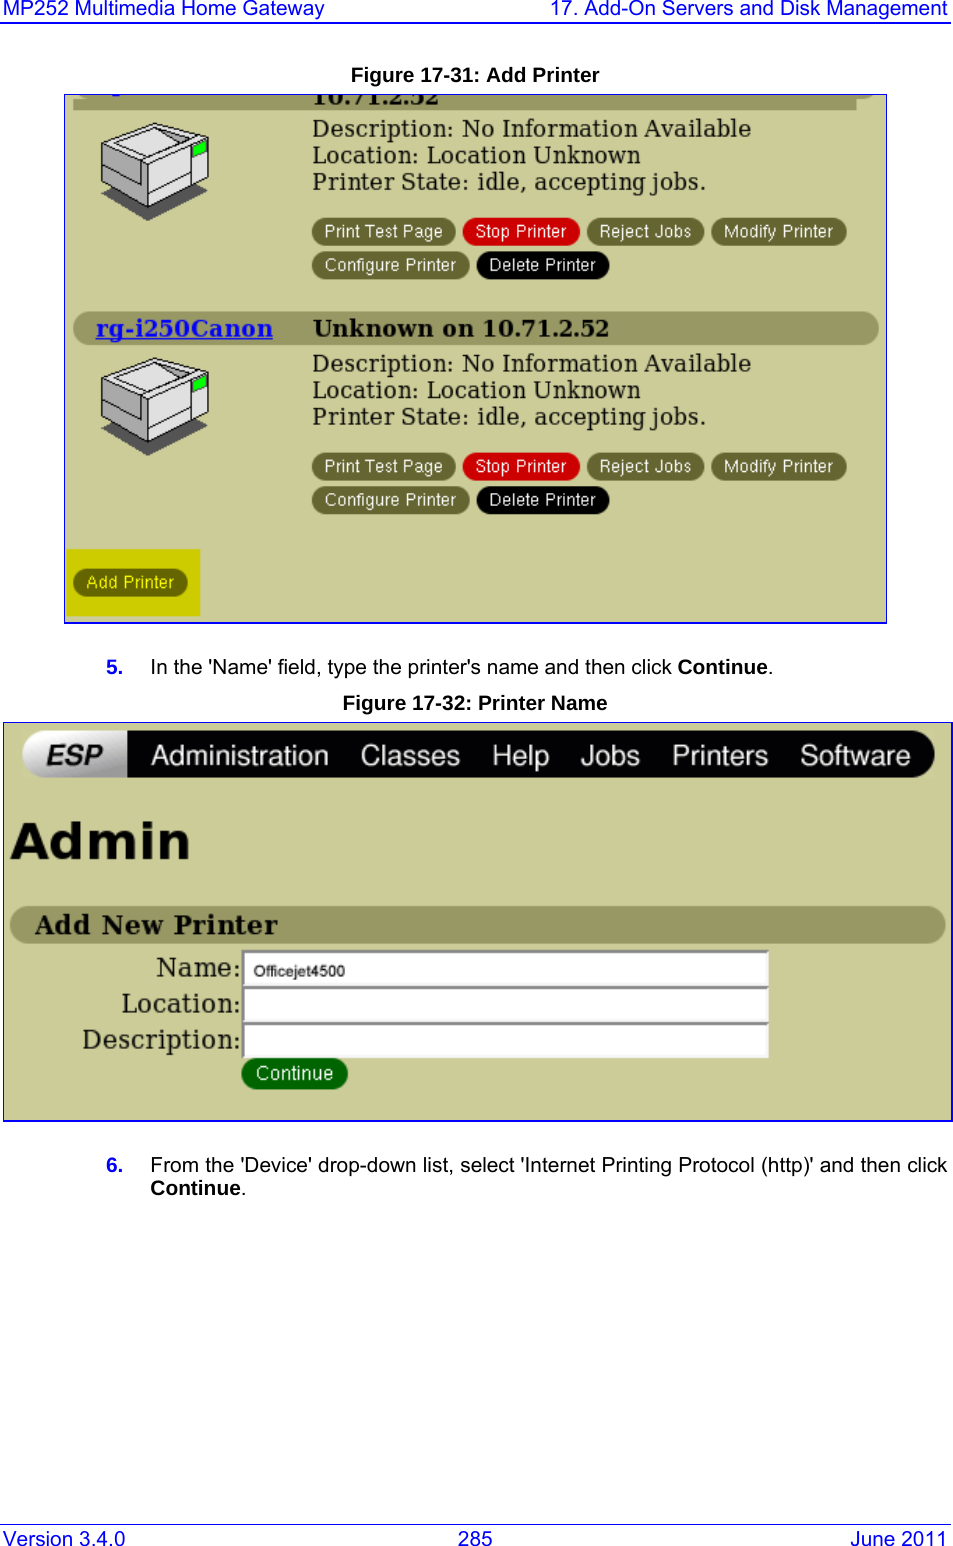 MP252 Multimedia Home Gateway  17. Add-On Servers and Disk Management Version 3.4.0  285  June 2011 Figure 17-31: Add Printer  5.  In the &apos;Name&apos; field, type the printer&apos;s name and then click Continue. Figure 17-32: Printer Name  6.  From the &apos;Device&apos; drop-down list, select &apos;Internet Printing Protocol (http)&apos; and then click Continue. 